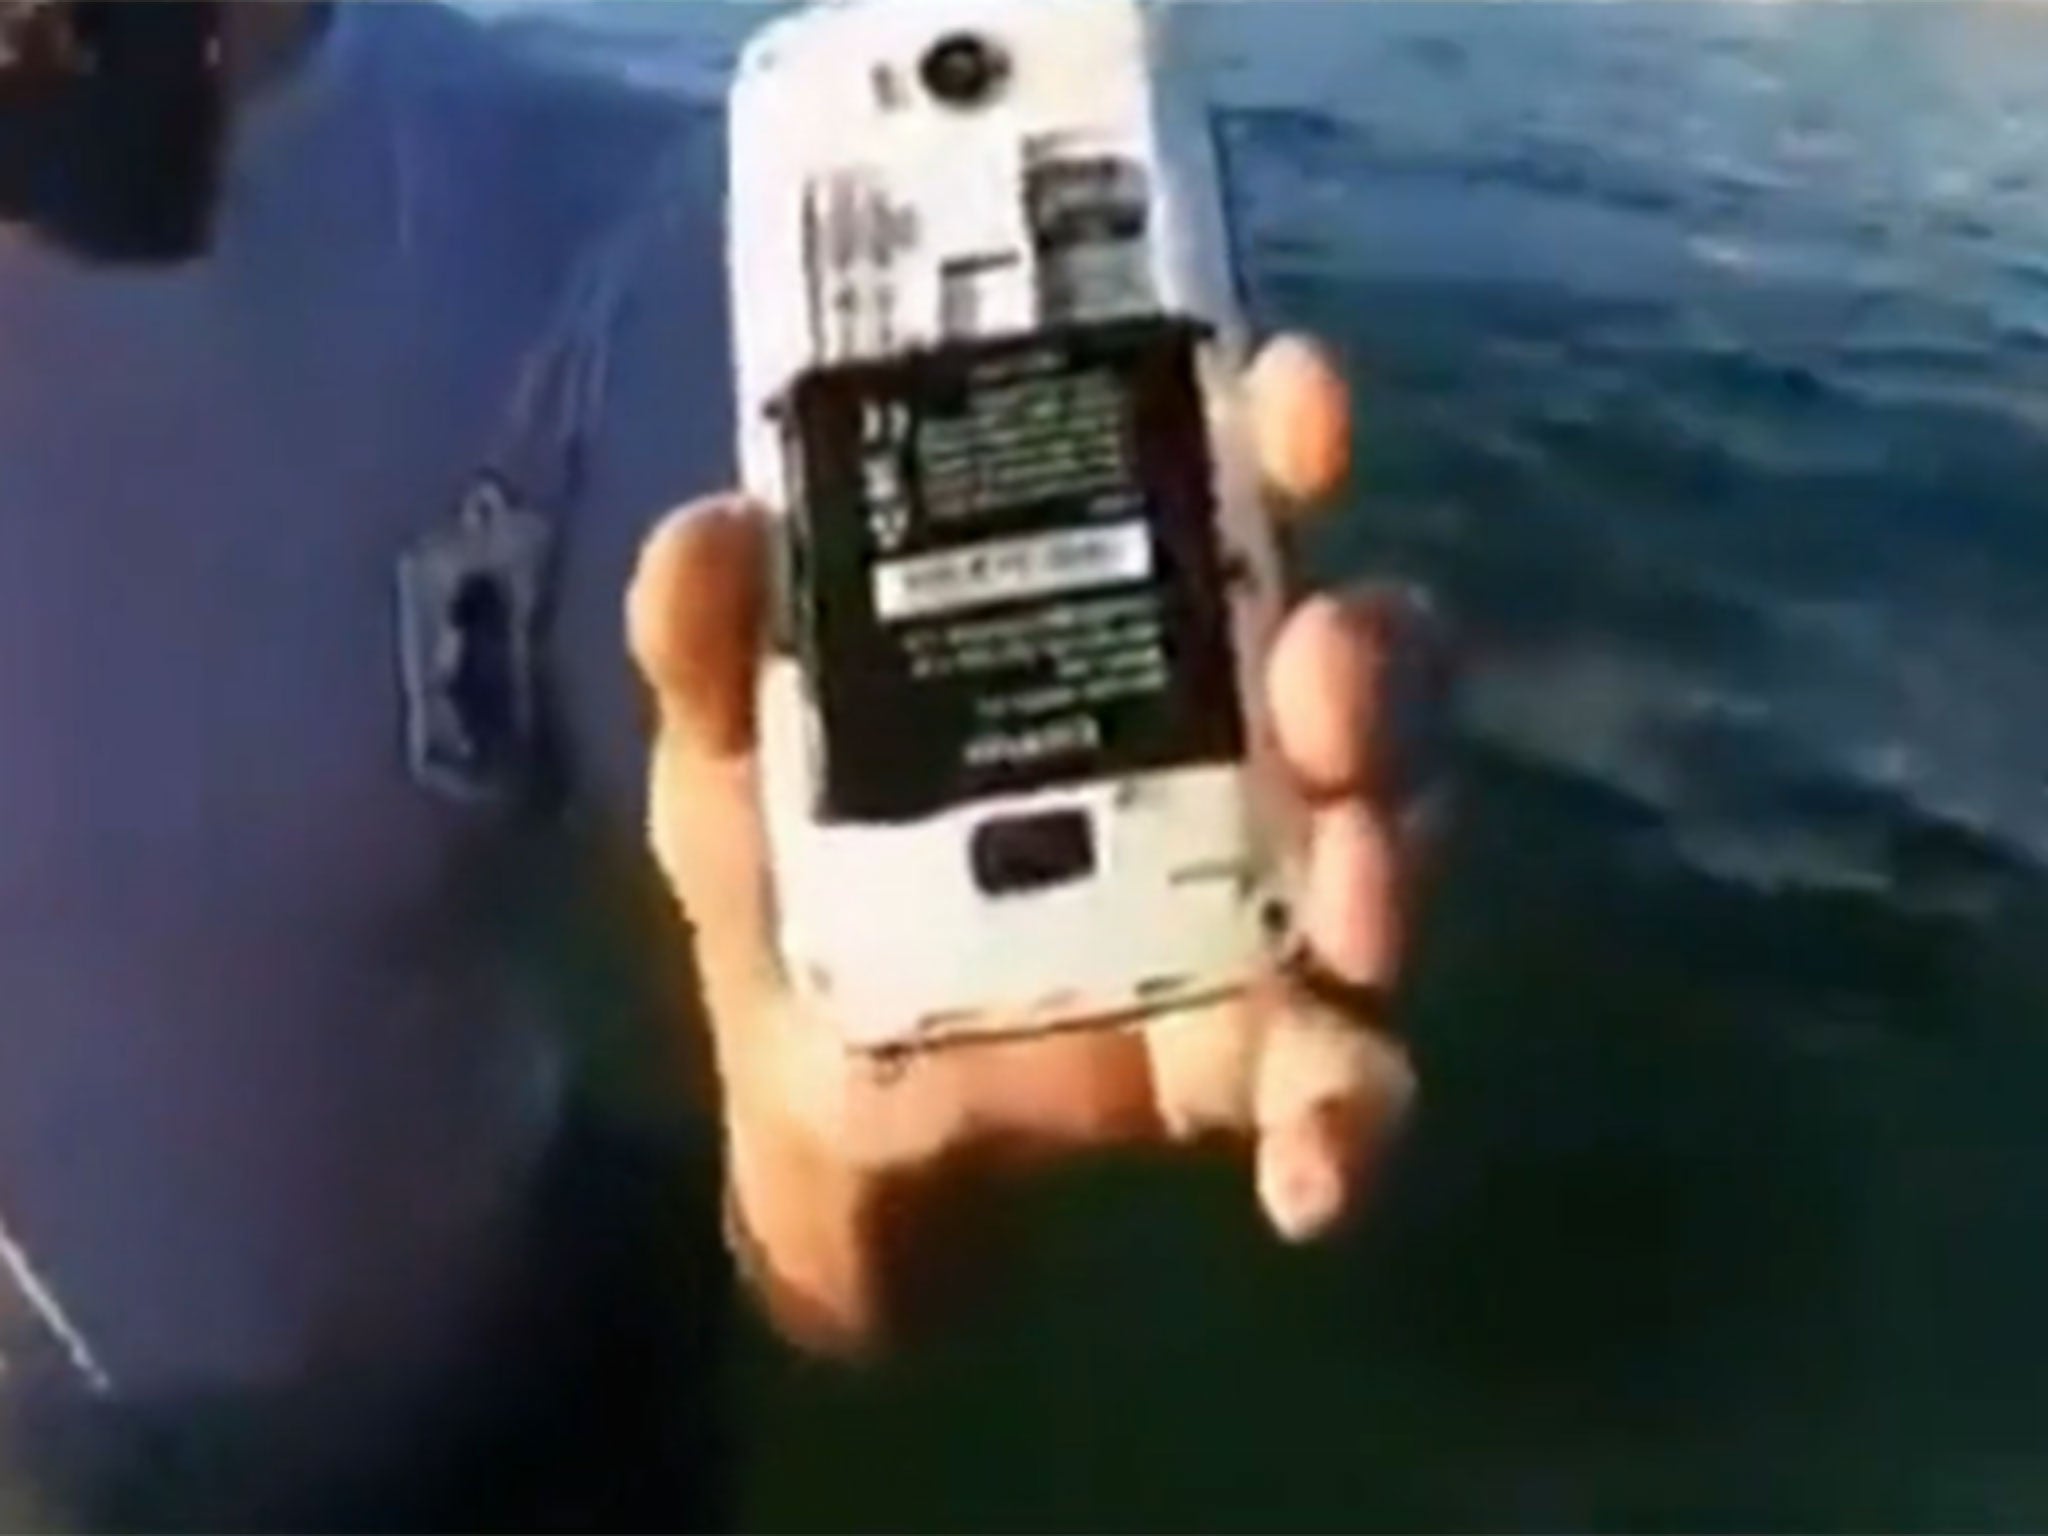 A video posted online appeared to show police retrieving Seifeddine Rezgui's phone from the sea